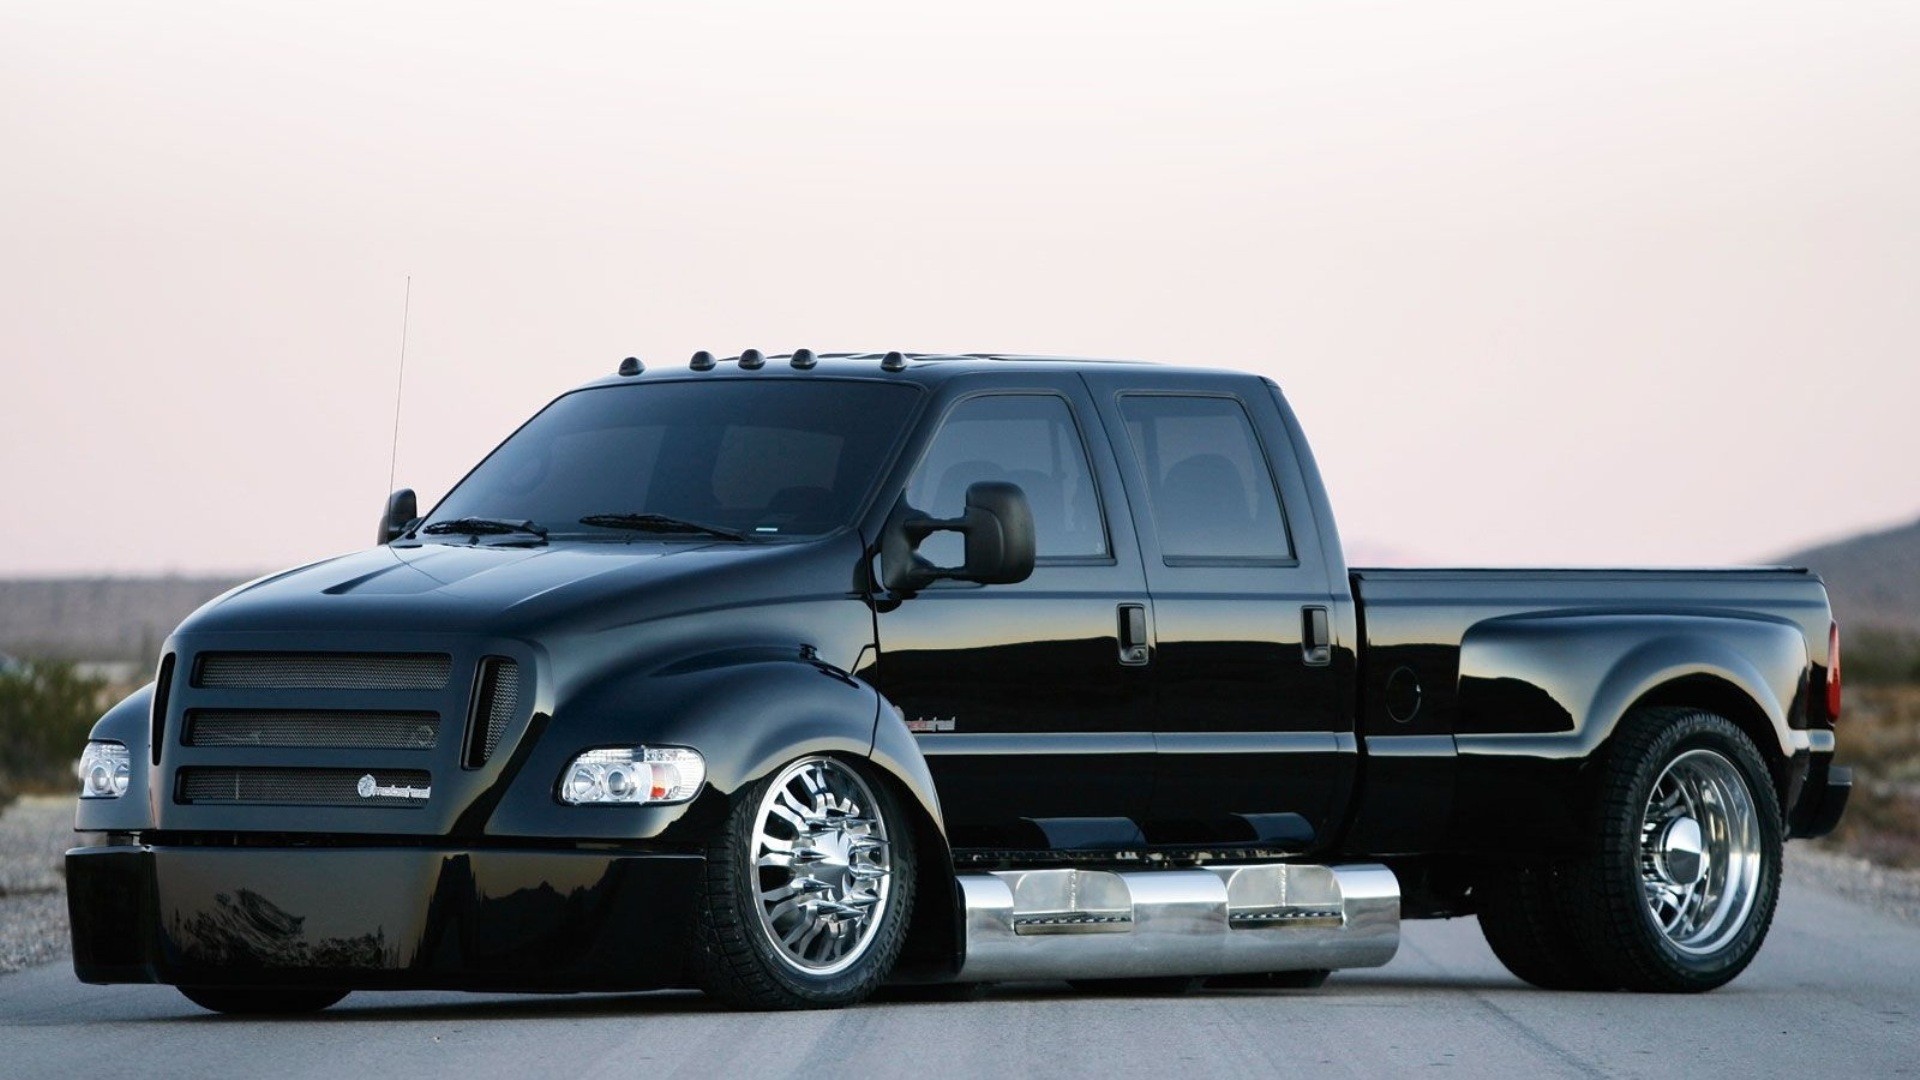 1920x1080 Ford F-650 Pickup - Imagine hauling your Ford GT, Porsche GT3RS or Ferrari